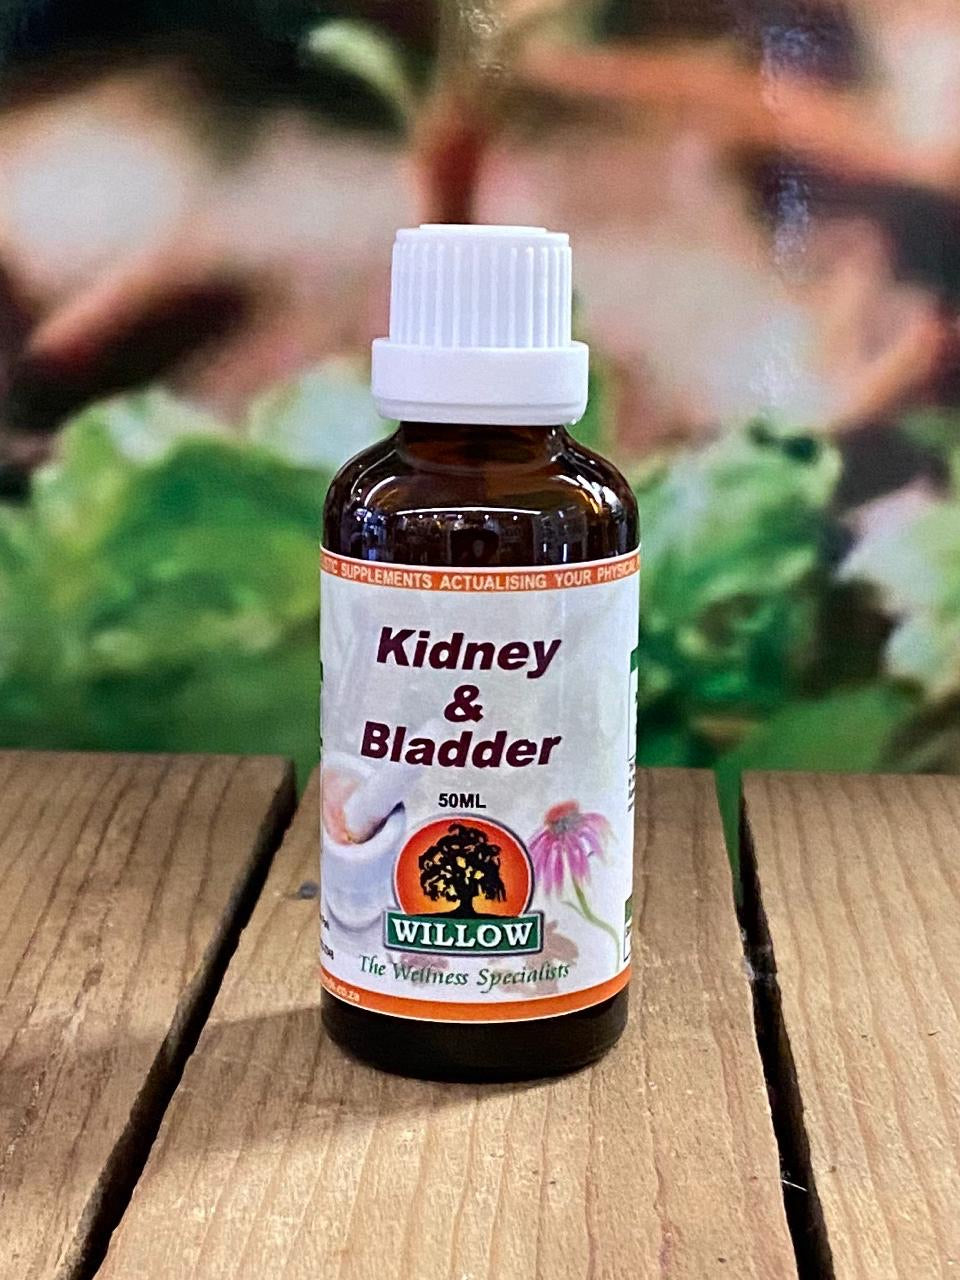 Willow Kidney and Bladder drops 50ml